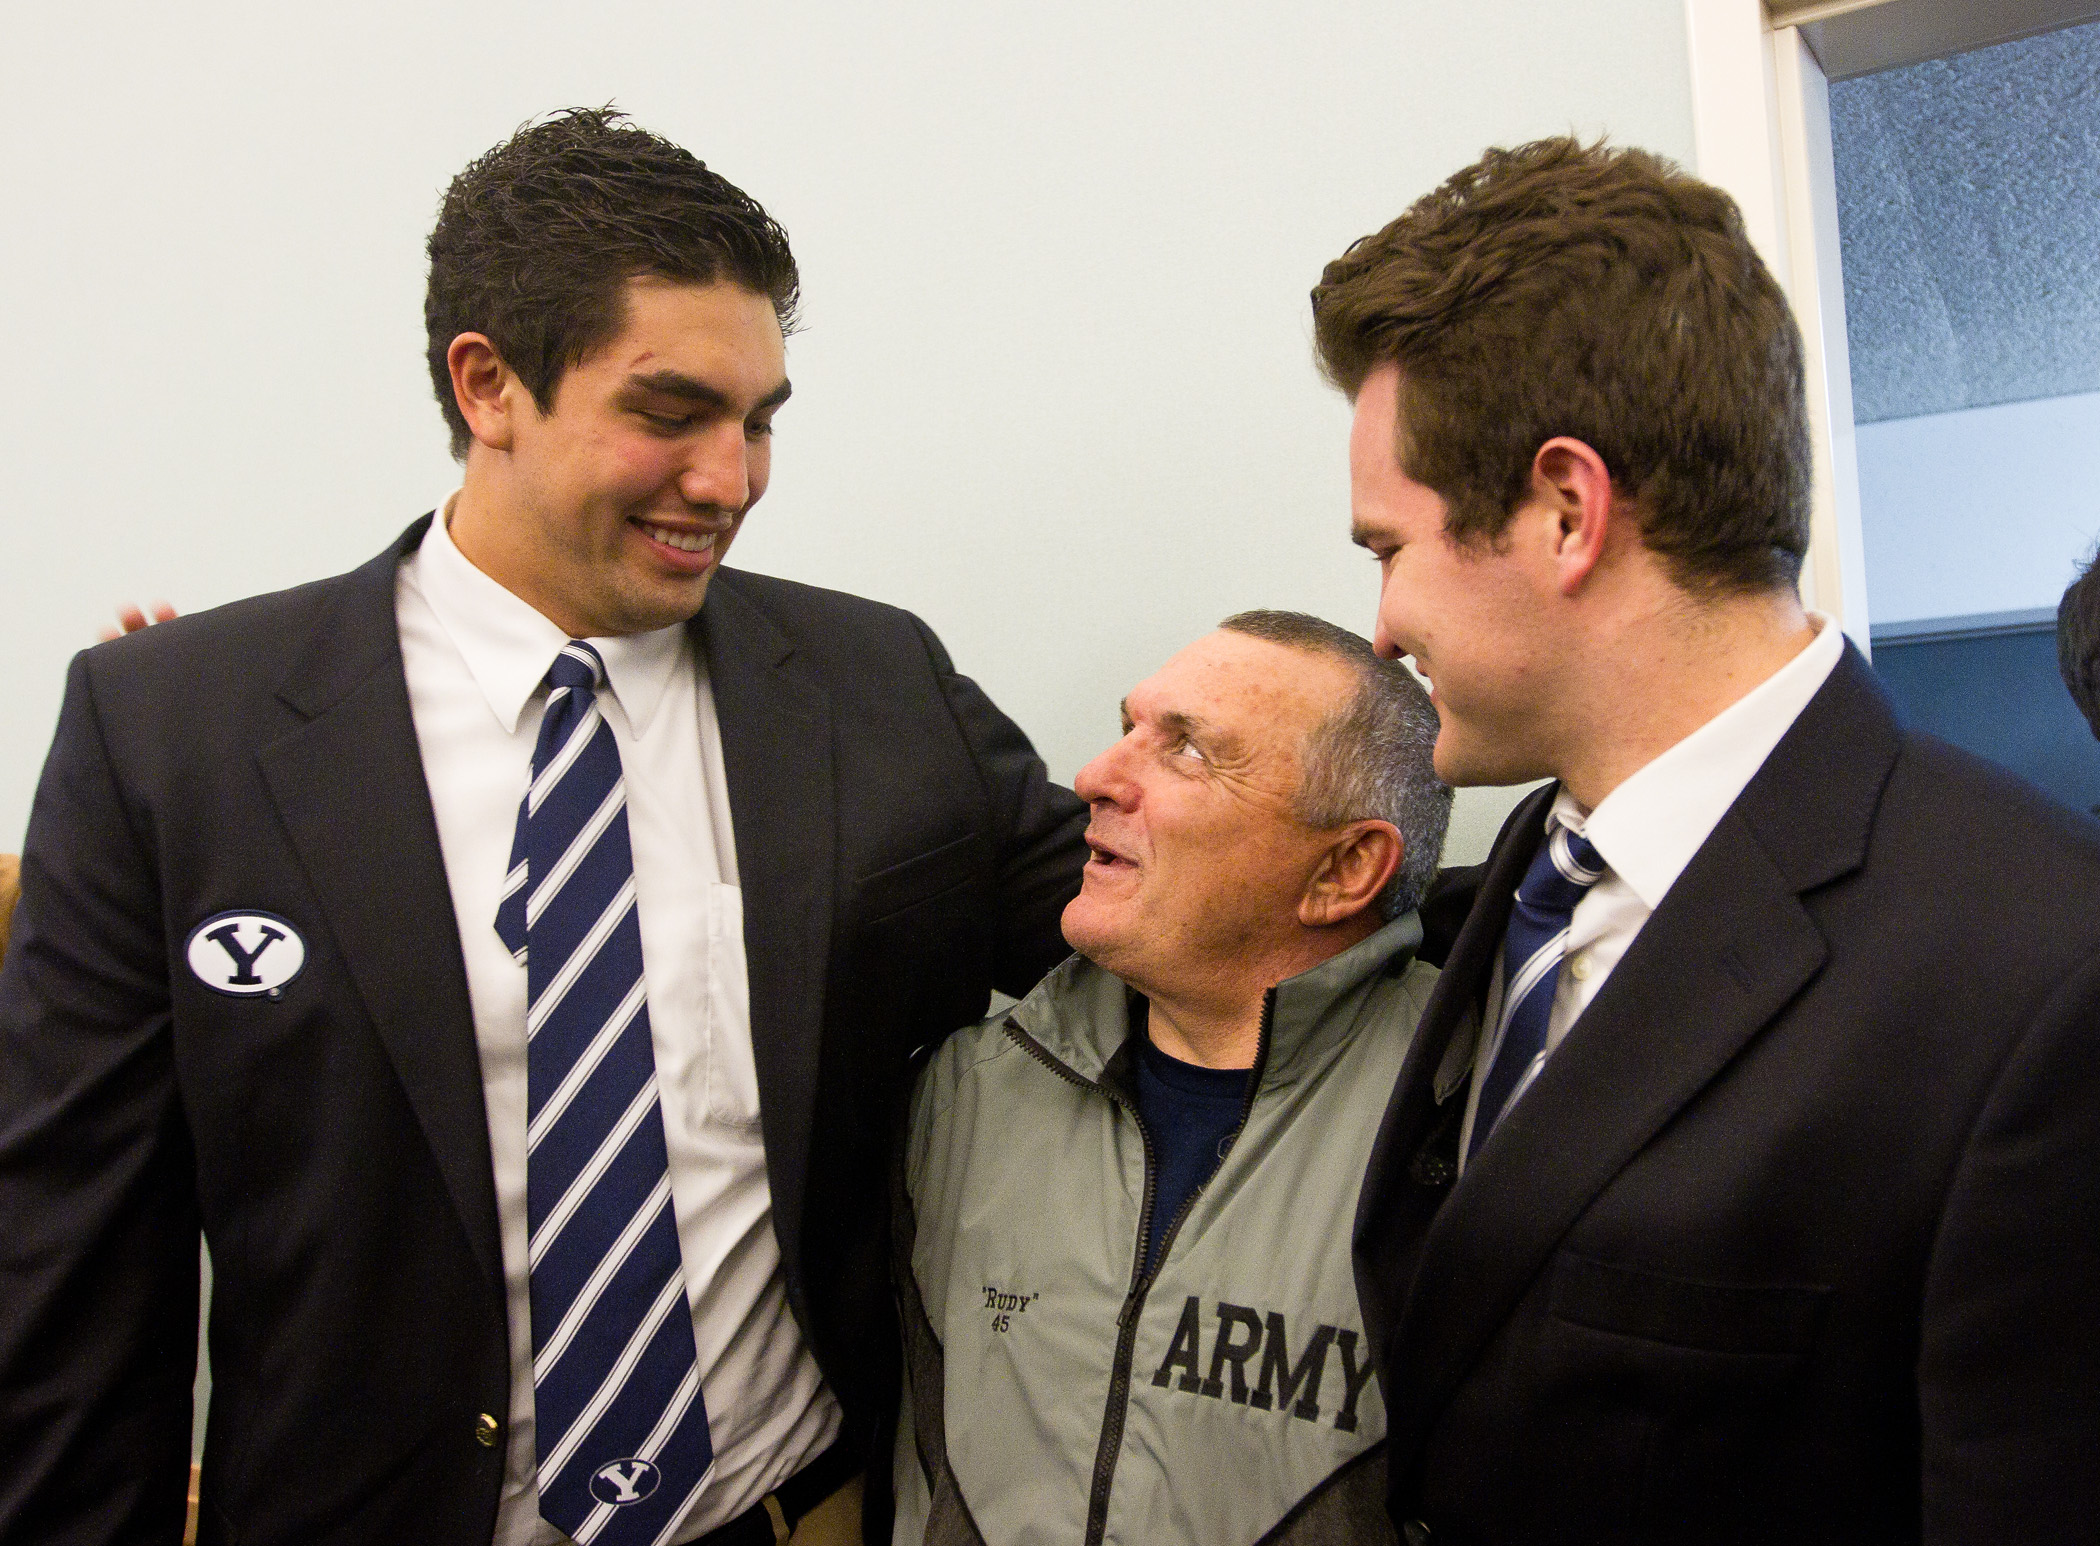 BYU football players Bronson Kaufusi and Skye Povey talk with Notre Dame legend Rudy Ruettiger at the team's traditional pregame fireside Friday, Nov. 22, 2013. (Photo by Sarah Hill)